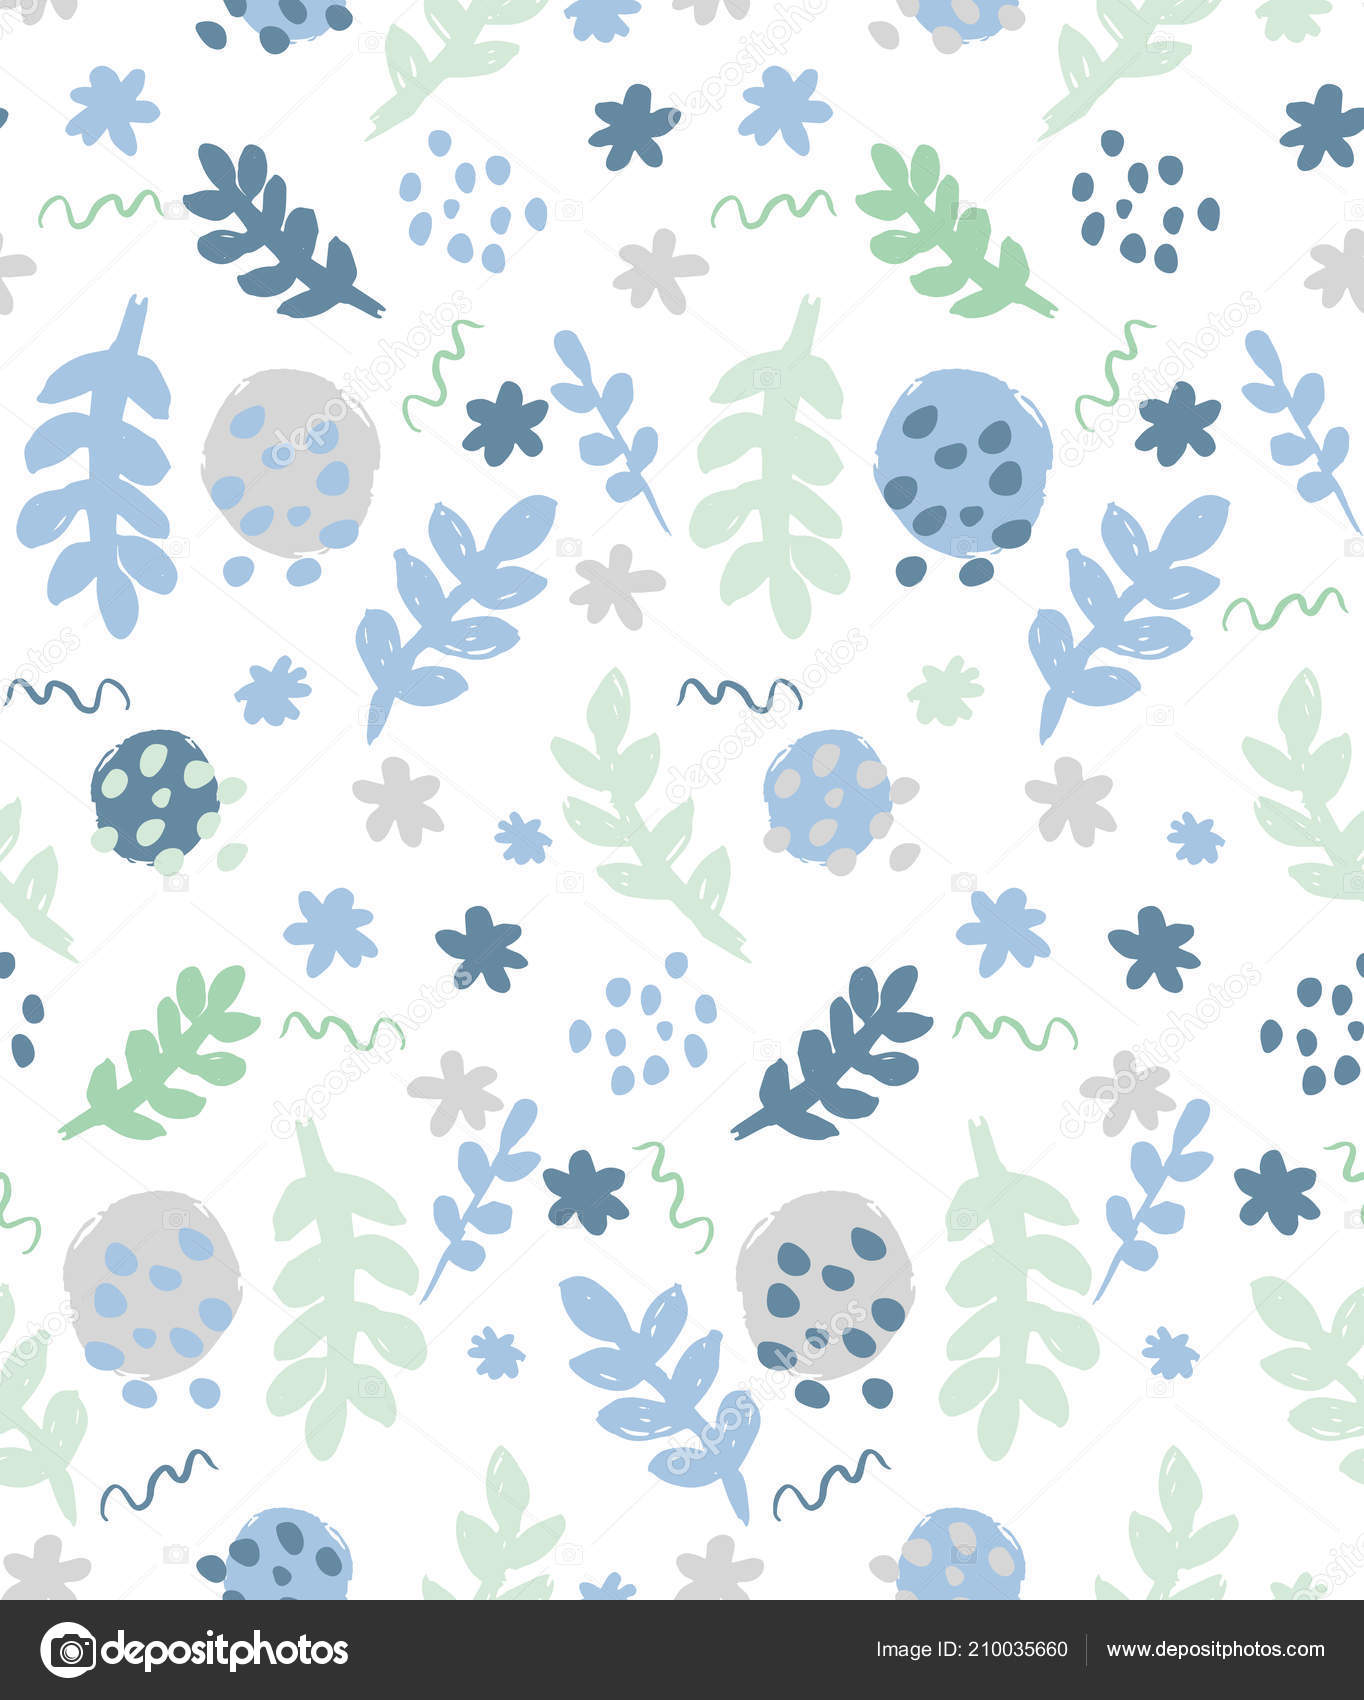 Cute Brushed Floral Vector Pattern - Wallpaper , HD Wallpaper & Backgrounds